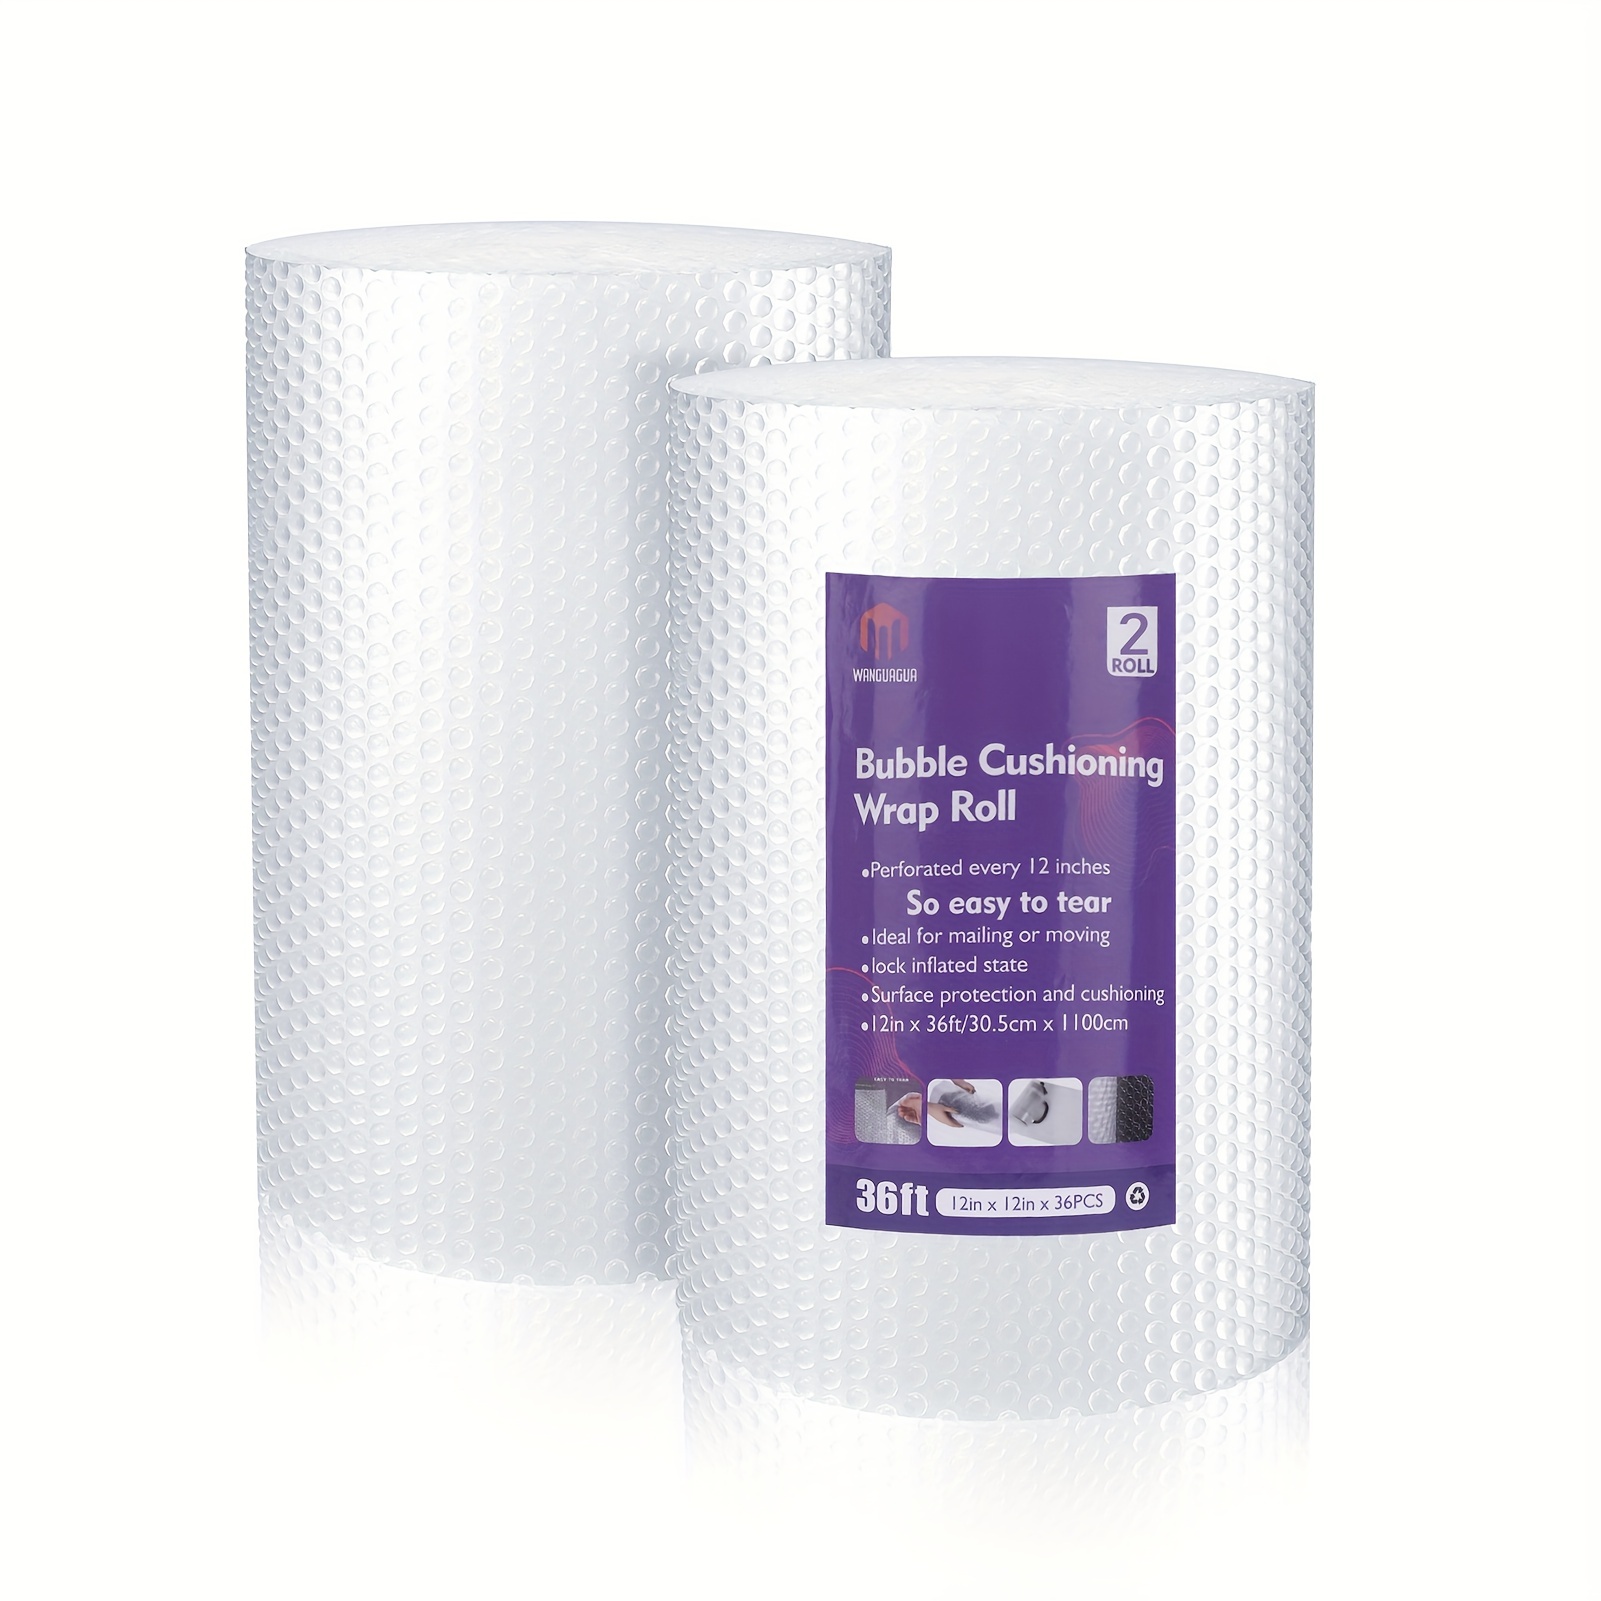 Contact Clear Adhesive 12in x 36ft